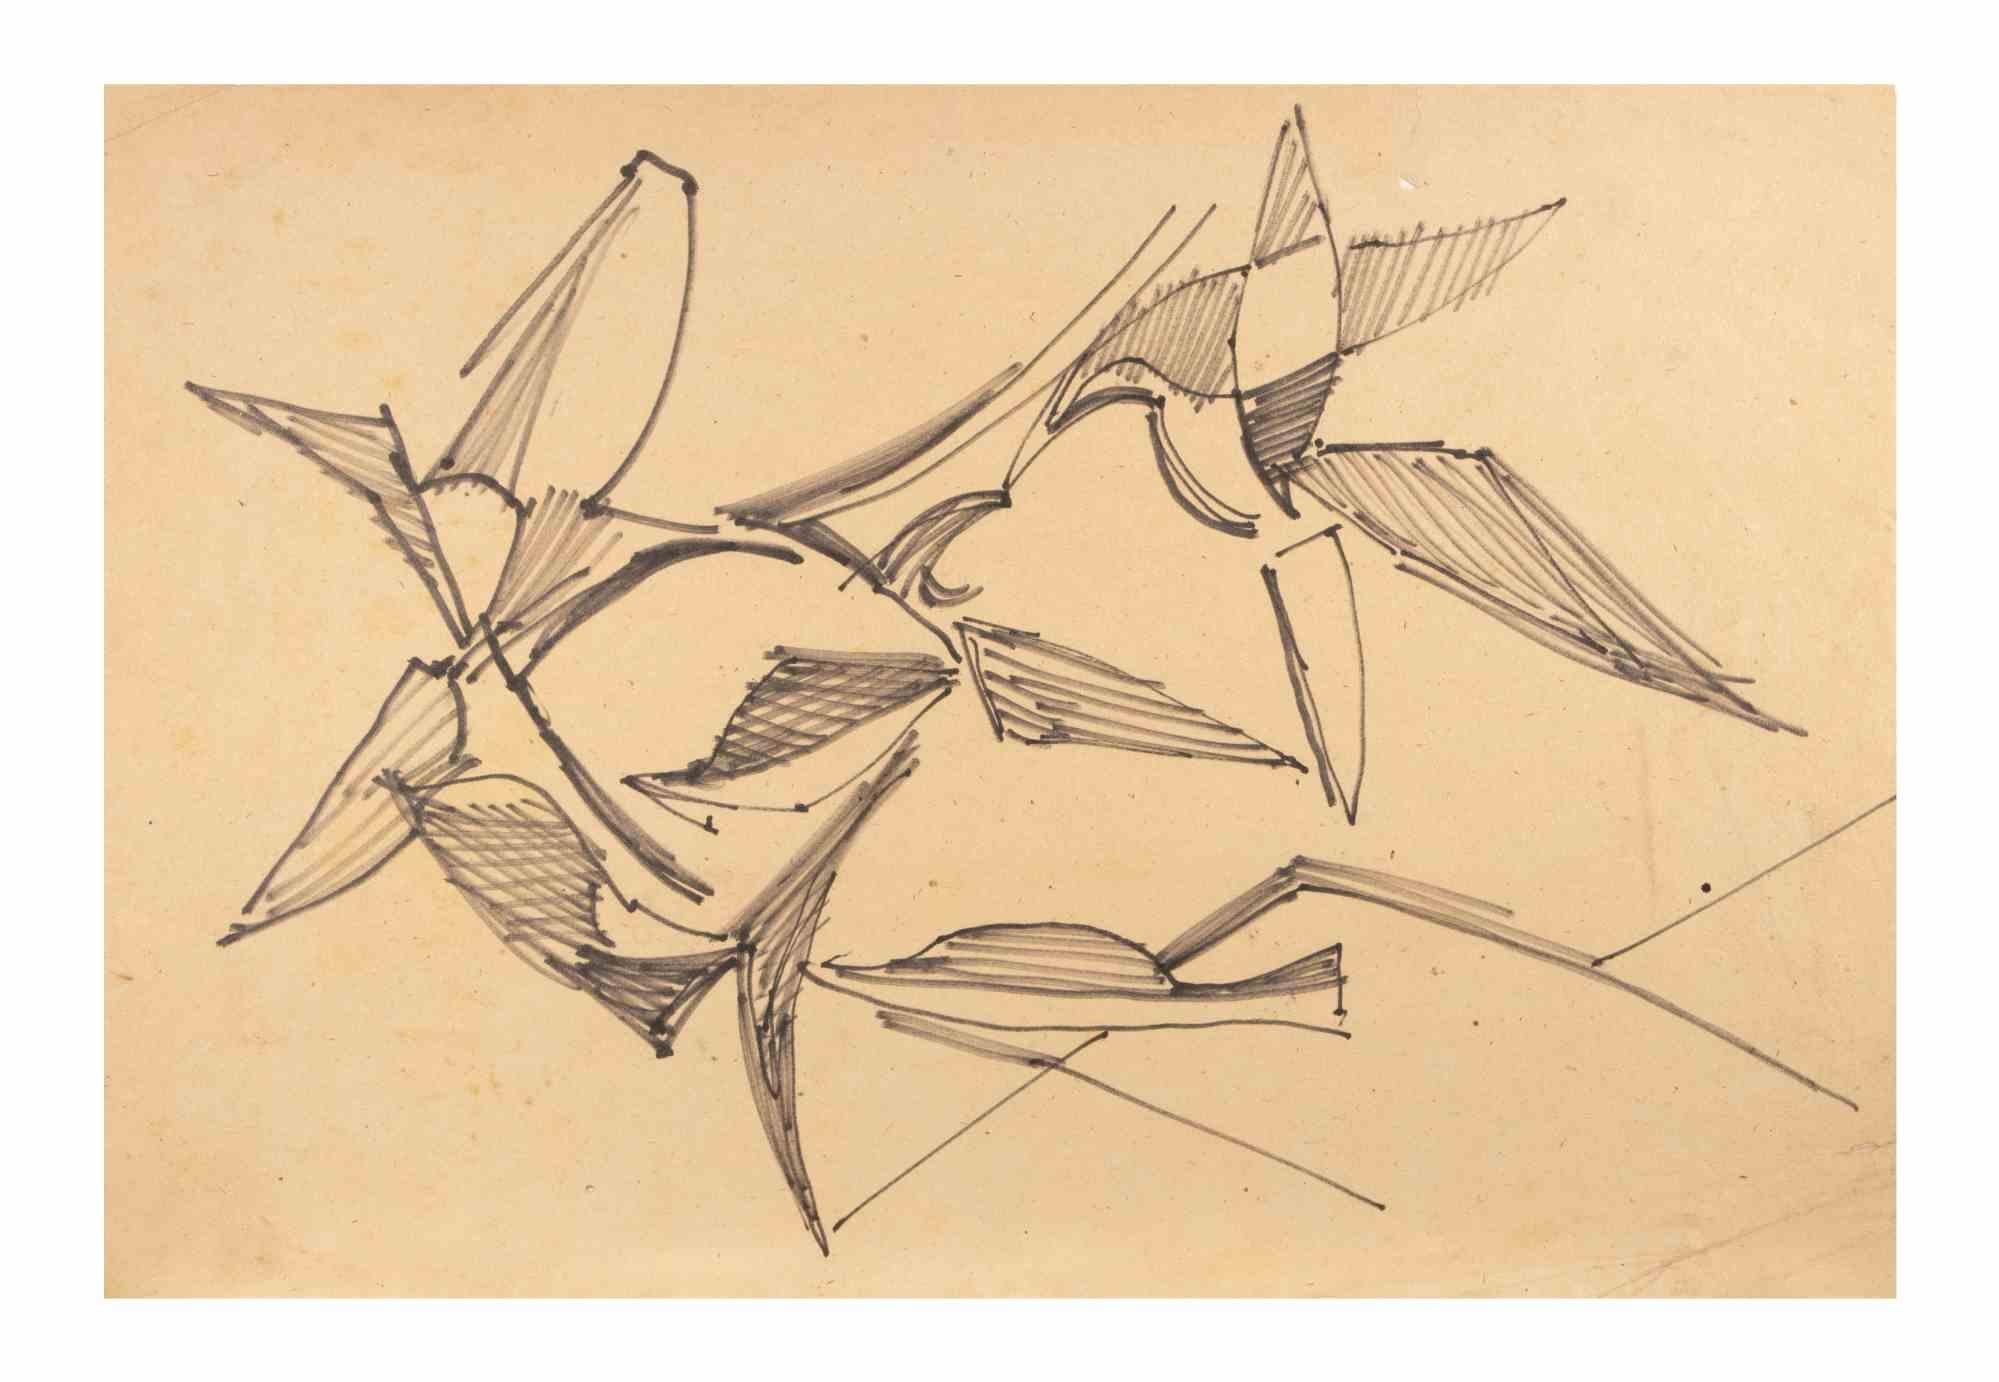 Abstract Coposition is a Black Marker Drawing realized by  Reynold Arnould  (Le Havre 1919 - Parigi 1980).

Good condition on a yellowed paper.

No signature.

Reynold Arnould was born in Le Havre, France in 1919. He studied at l'École des